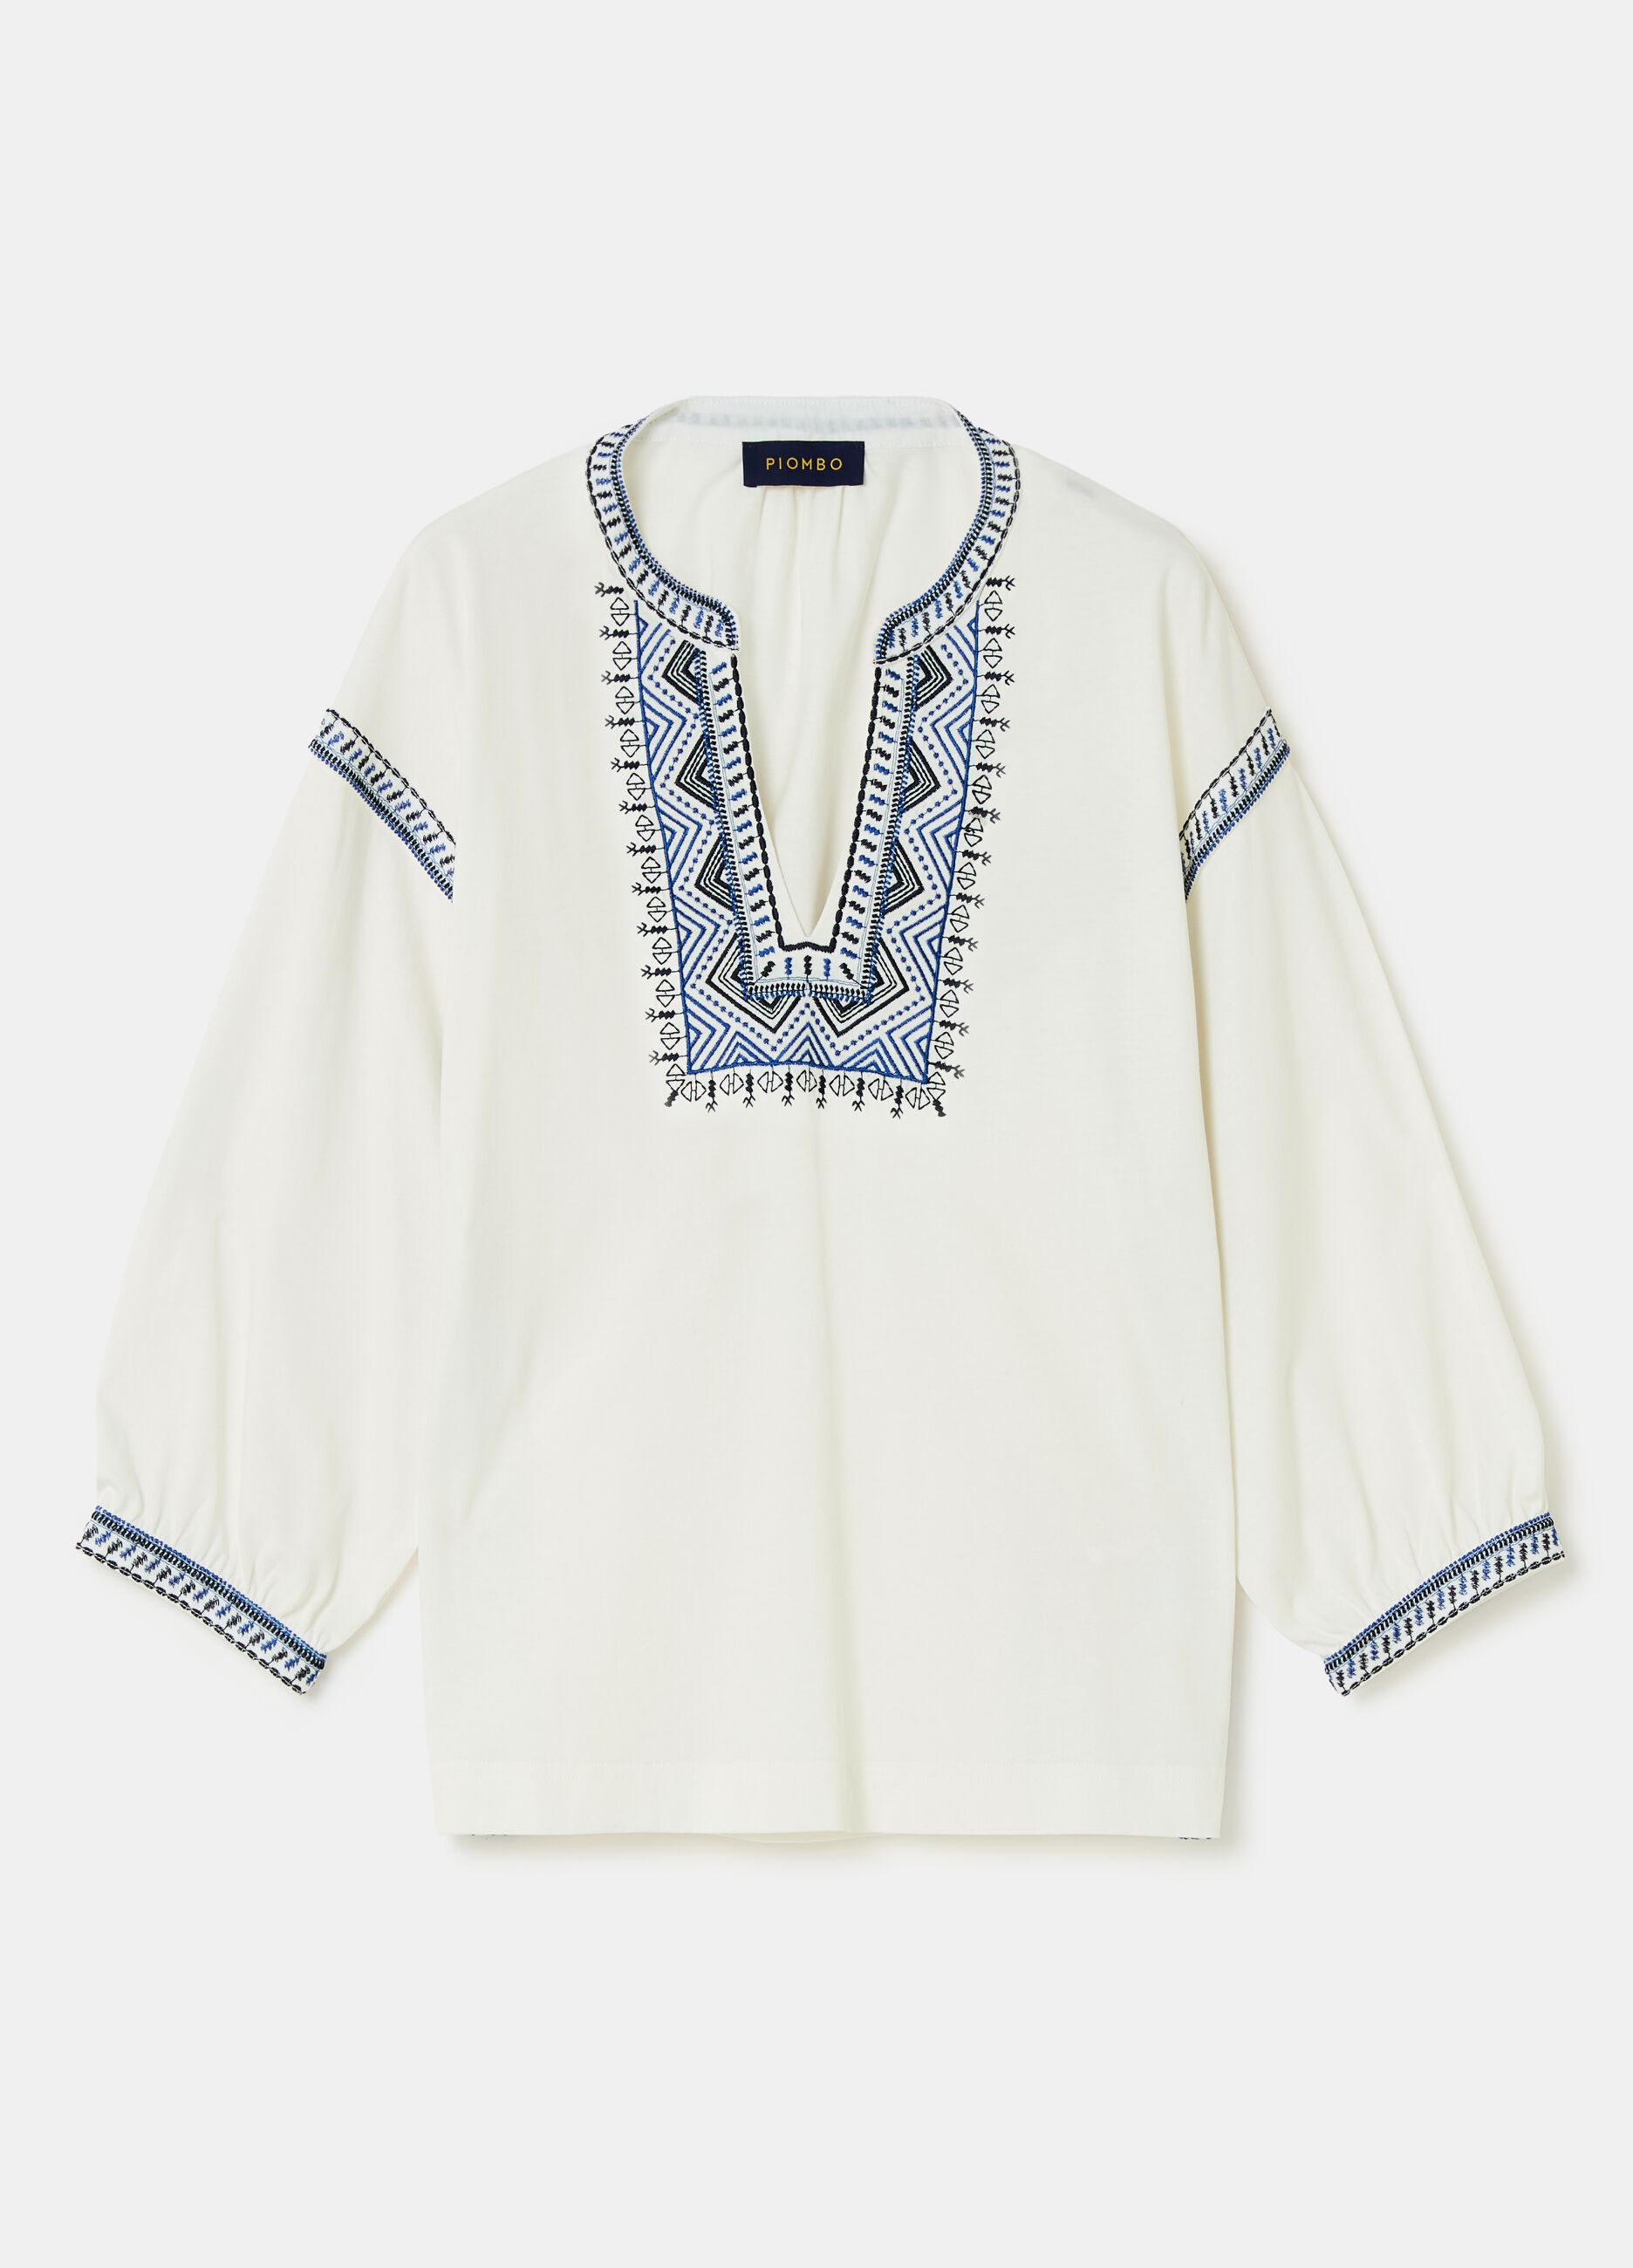 Cotton T-shirt with ethnic embroidery